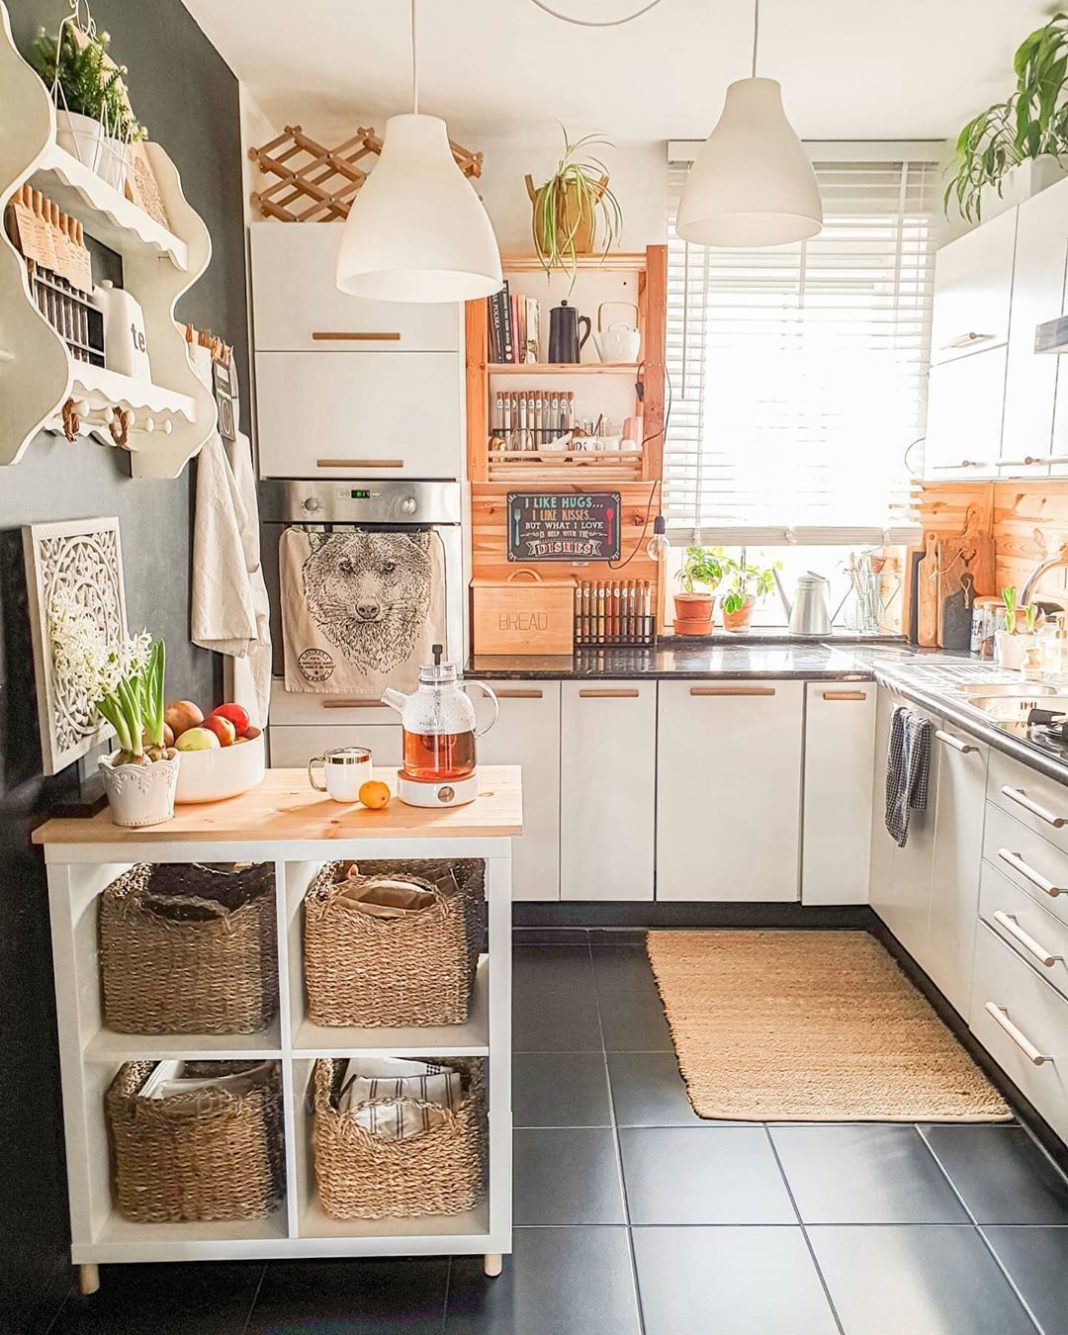 9 Clever IKEA Hacks that’ll Help You Make the Most of Your Tiny Kitchen